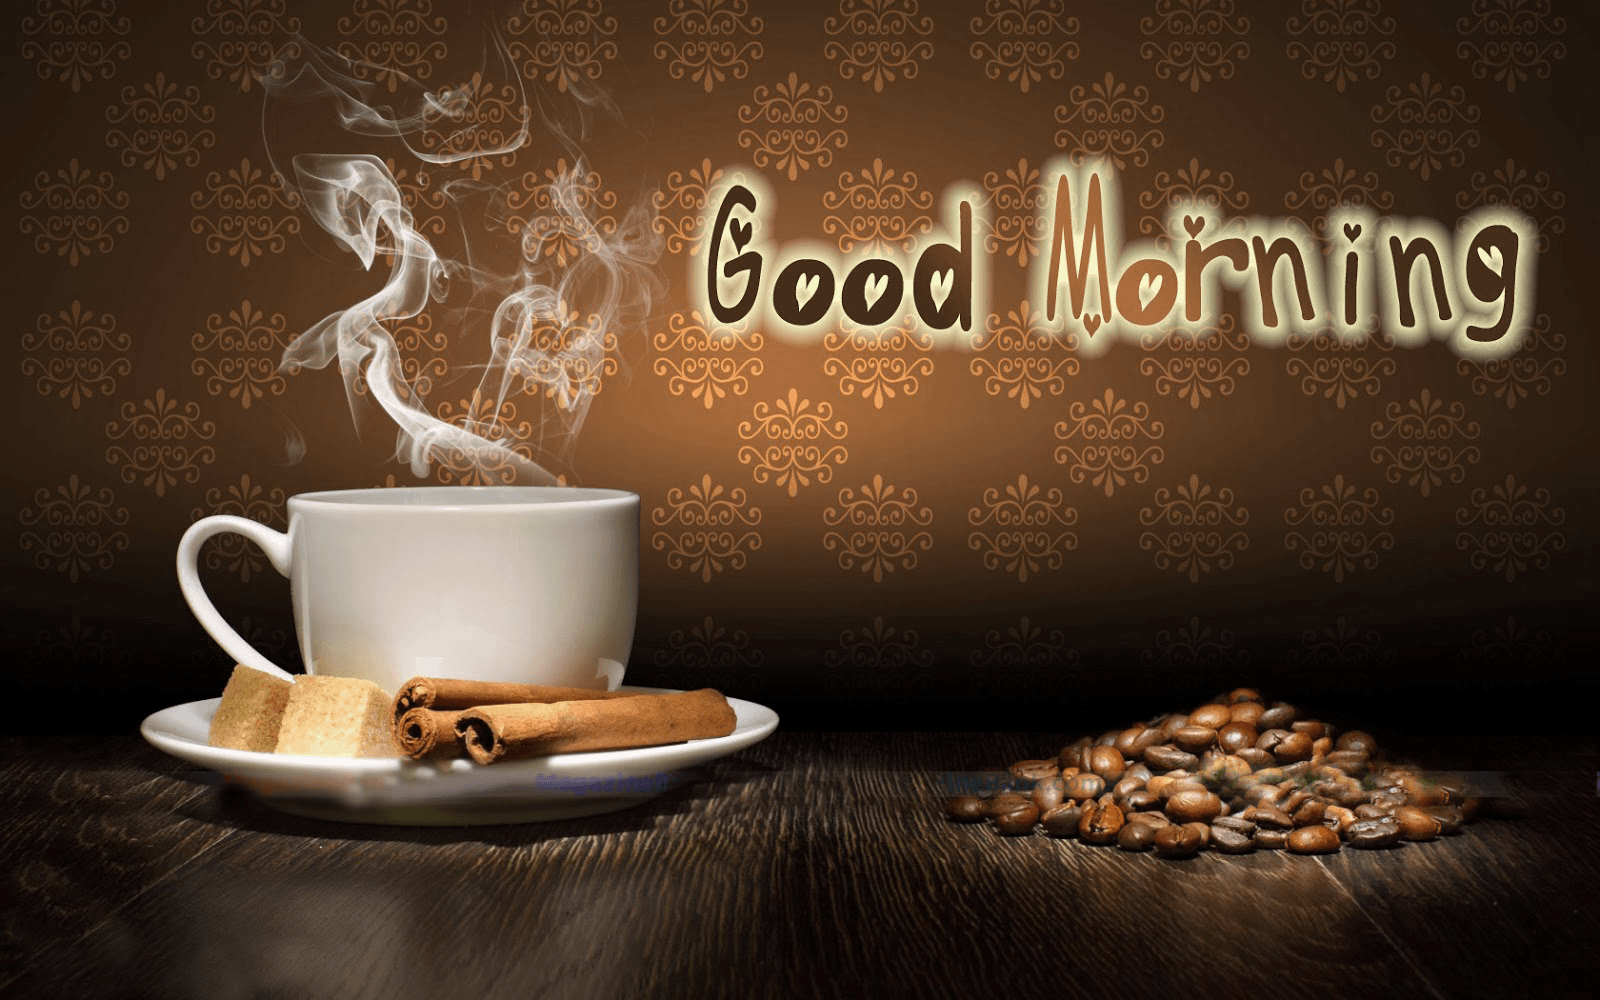 Coffee Morning PNG HD Transparent Coffee Morning HD.PNG Image